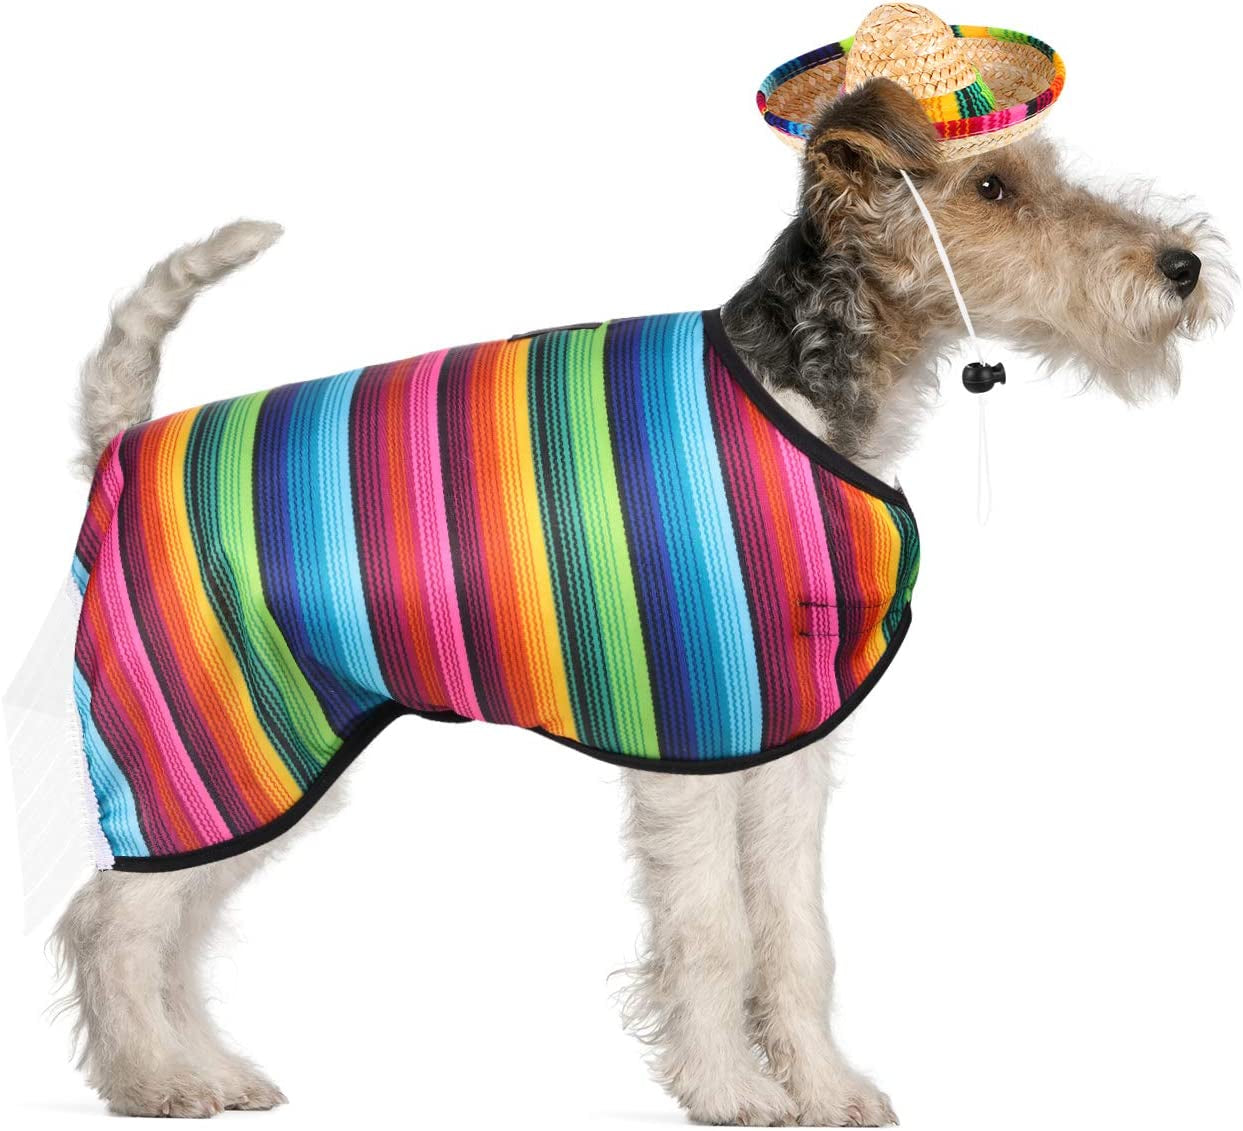 Dog Sombrero Hat Pet Serape Poncho Costume Multicolor Funny Dog Costume Adjustable Sombrero Costume Mexican Dog Poncho Straw Hat Chihuahua Clothes for Mexican Party Decorations (M)